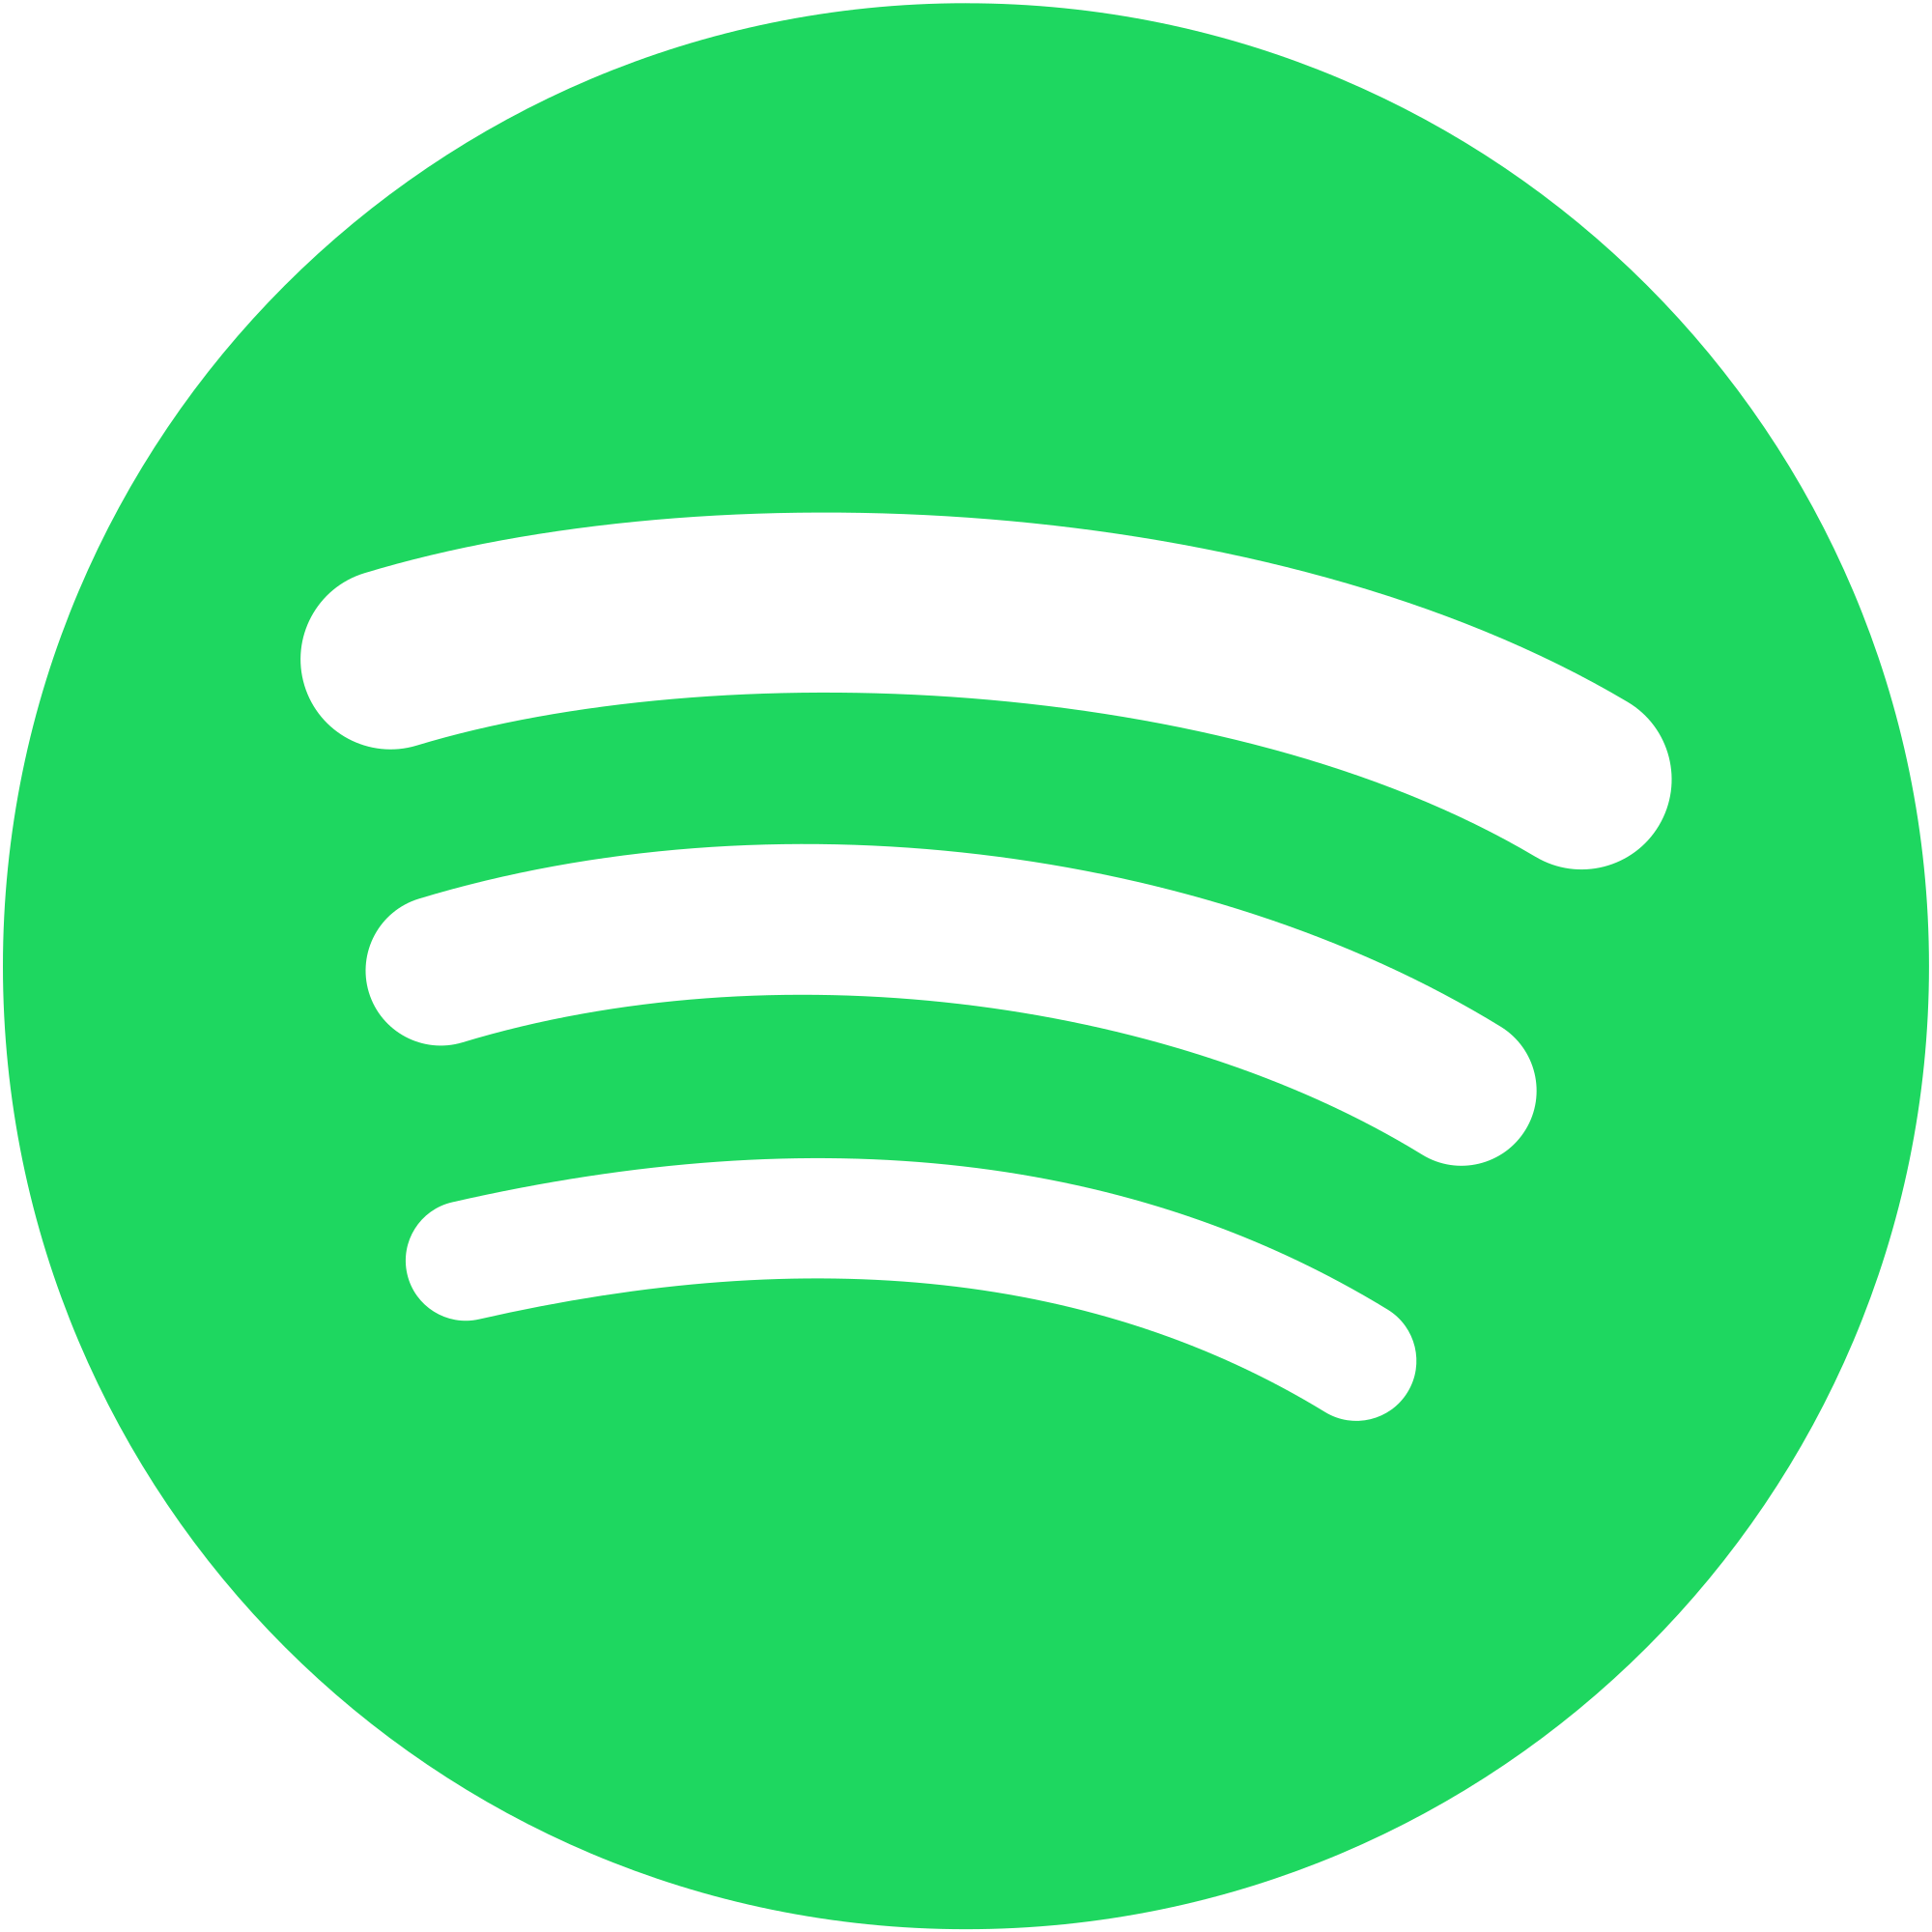 Spotify Vector Logo - Spotify Logo PNG Transparent Spotify Logo.PNG Images. | PlusPNG